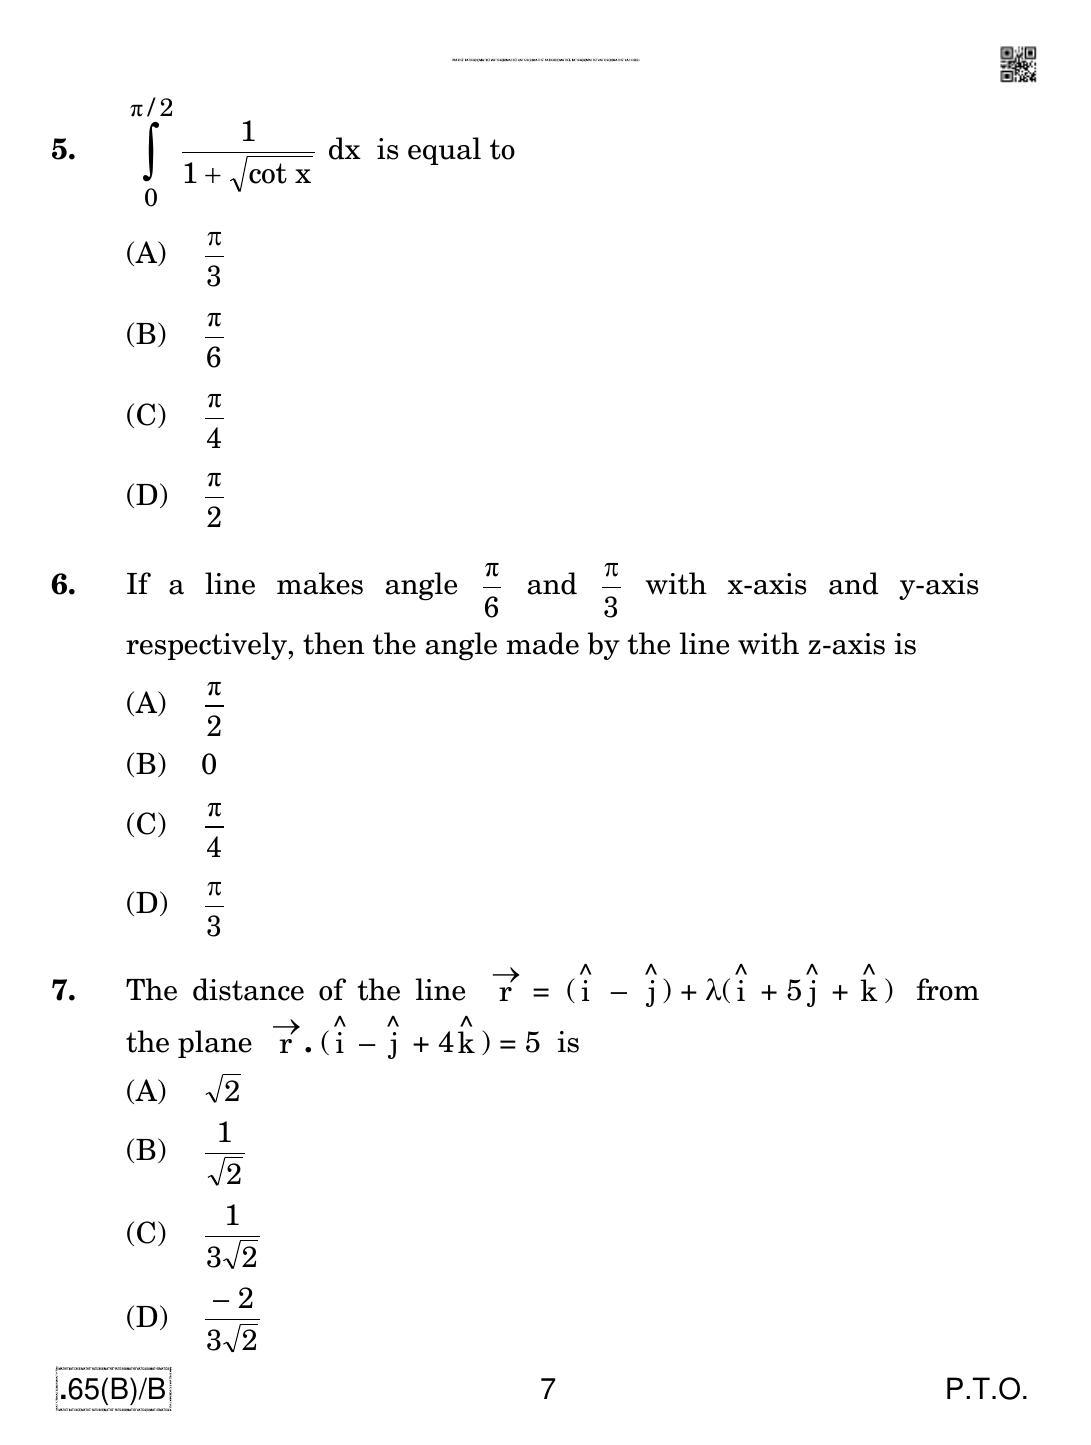 CBSE Class 12 65(B)-C - Maths For Blind Candidates 2020 Compartment Question Paper - Page 7